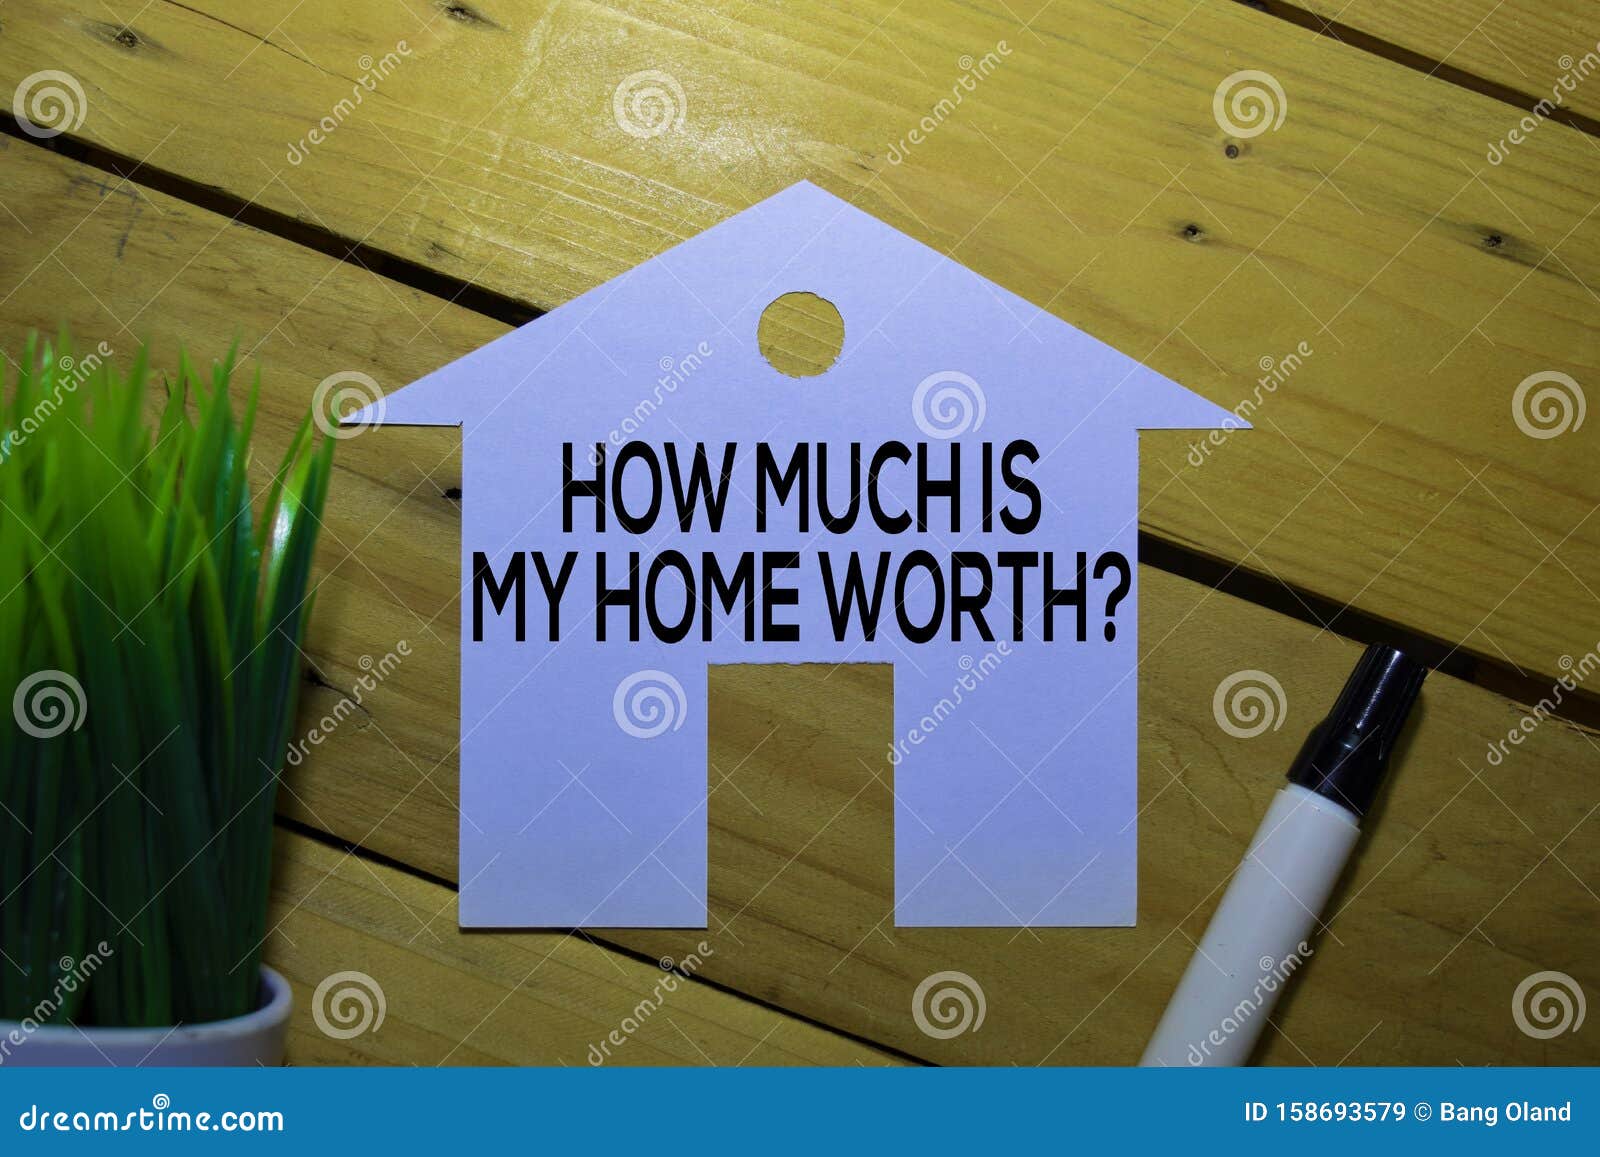 How Much My Home Worth Text Table Concept Property Business Concept How Much My Home Worth Text Table 158693579 